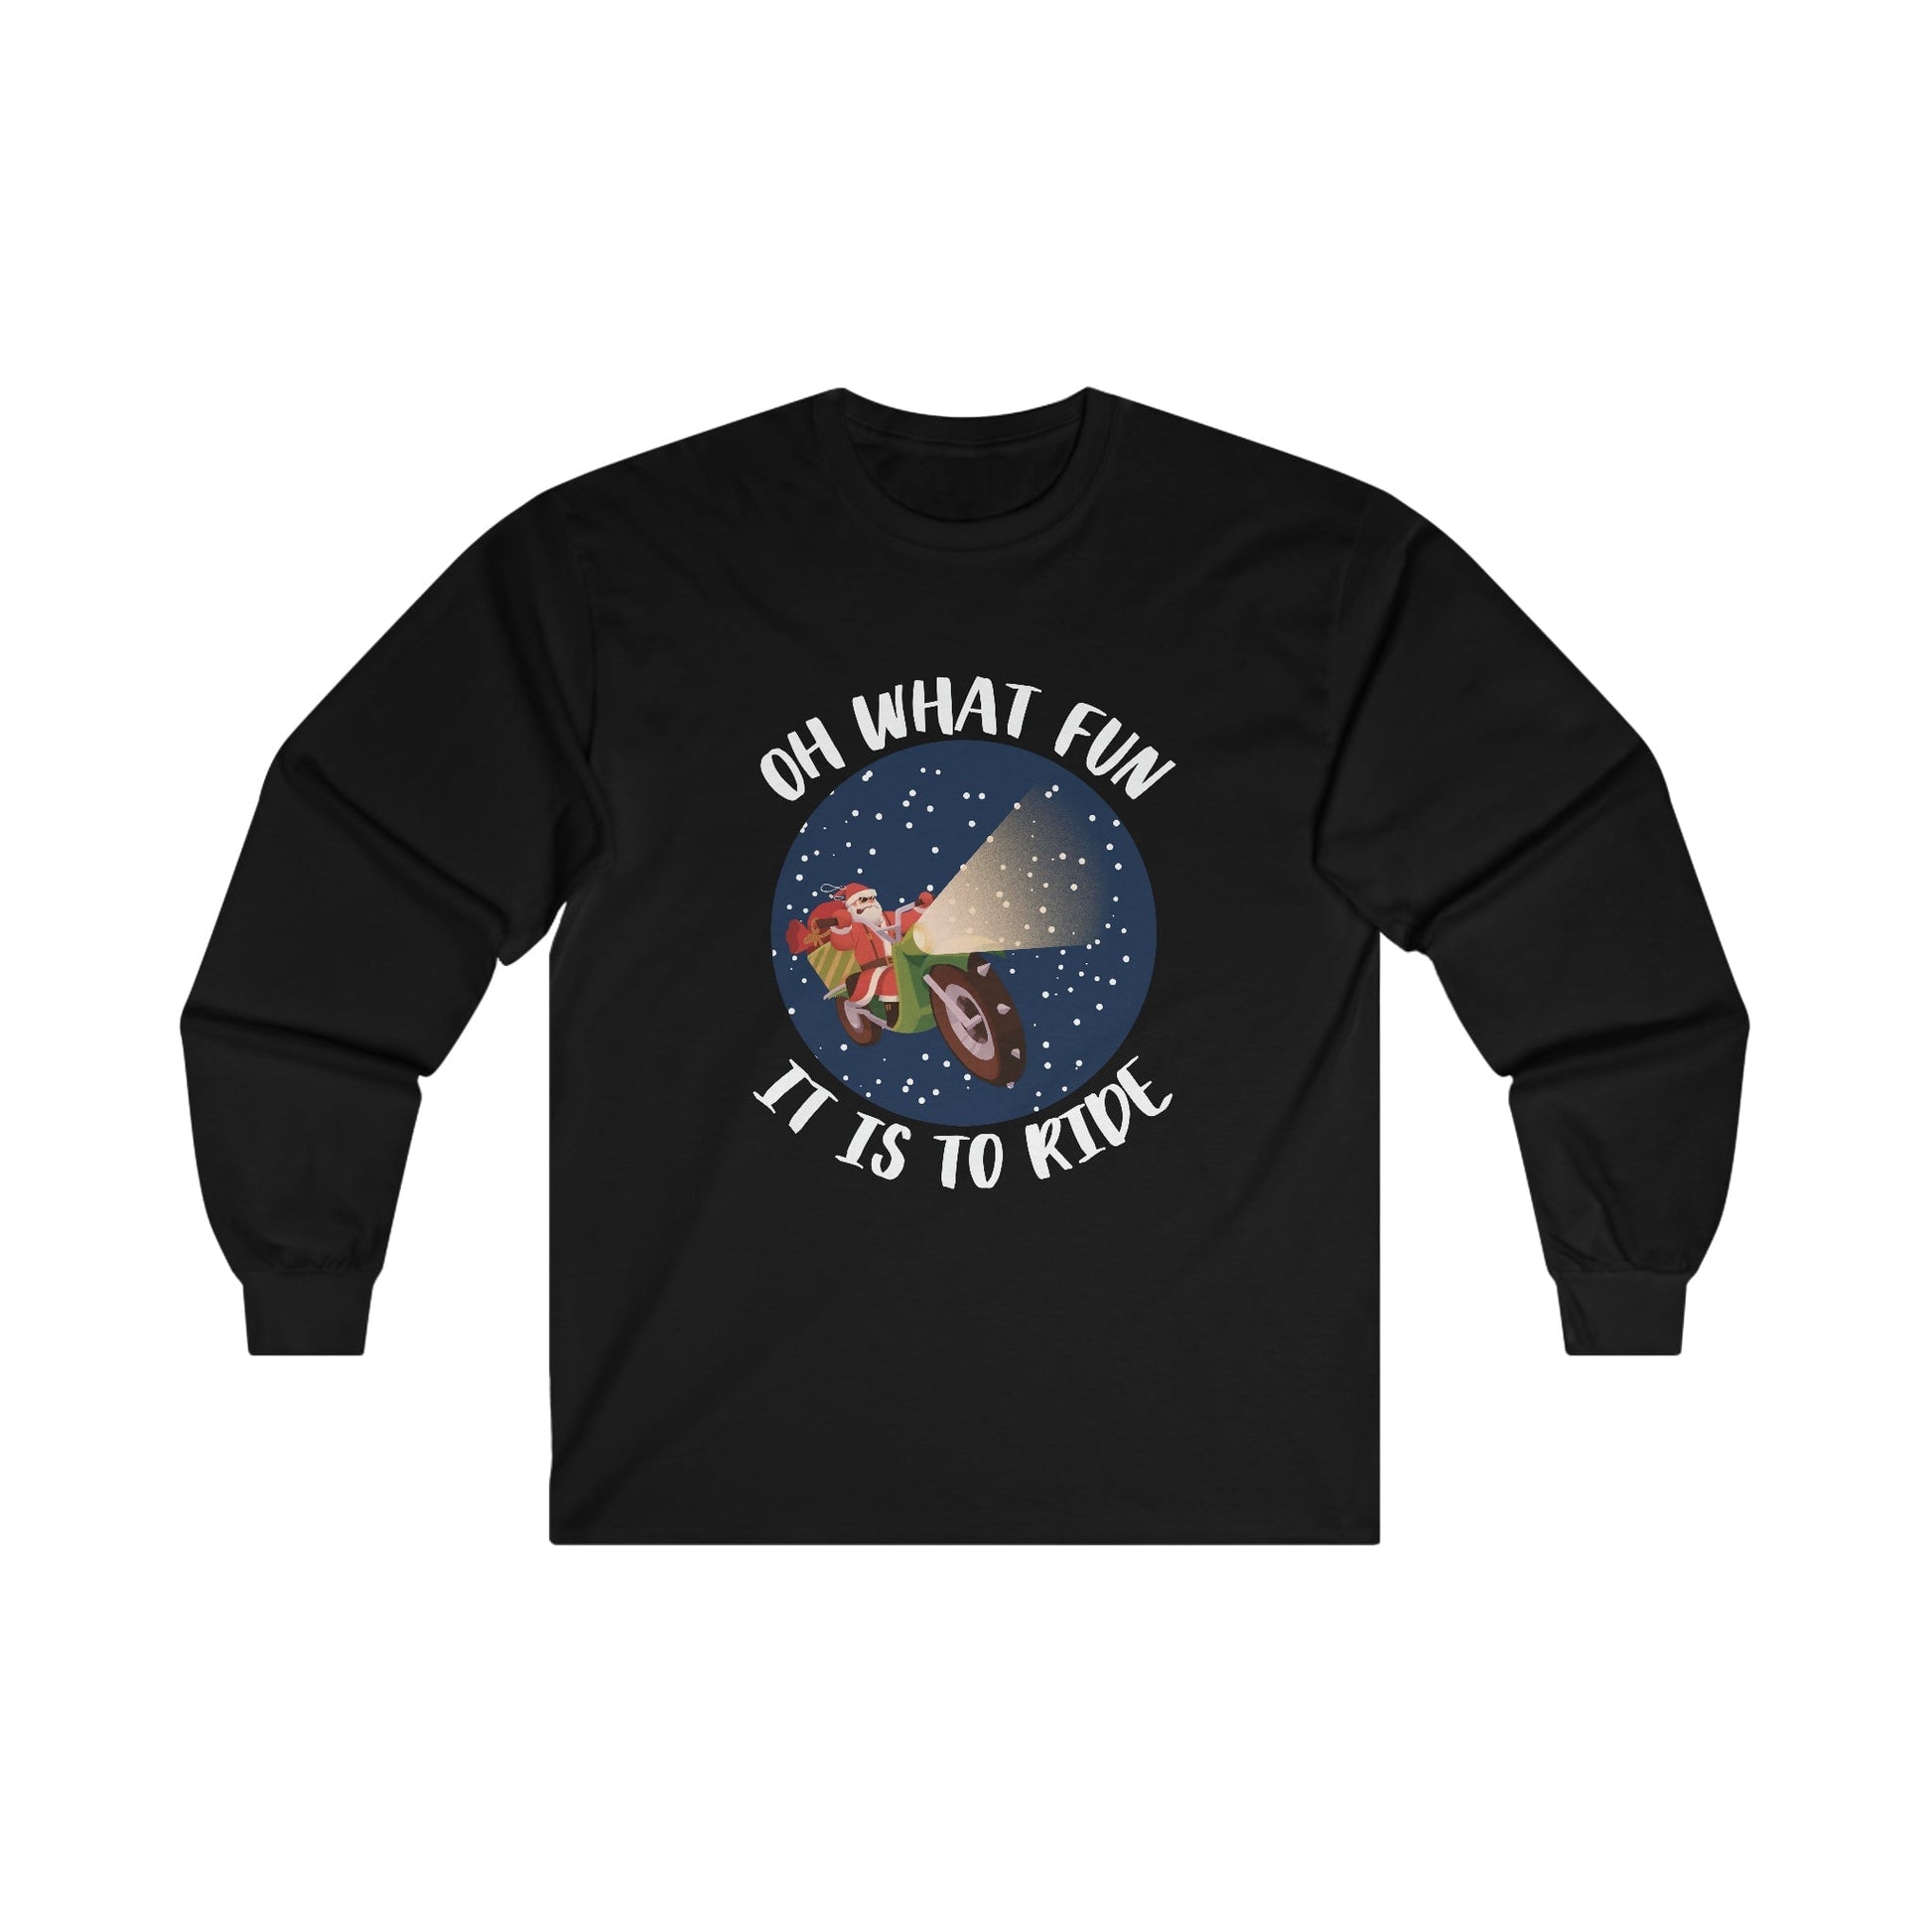 Christmas Long Sleeve T-Shirt - Oh What Fun It Is To Ride - Mens and Boys Christmas Shirts - Youth and Adult Christmas Long Sleeve TShirts Long Sleeve T-Shirts Graphic Avenue Black Adult Small 